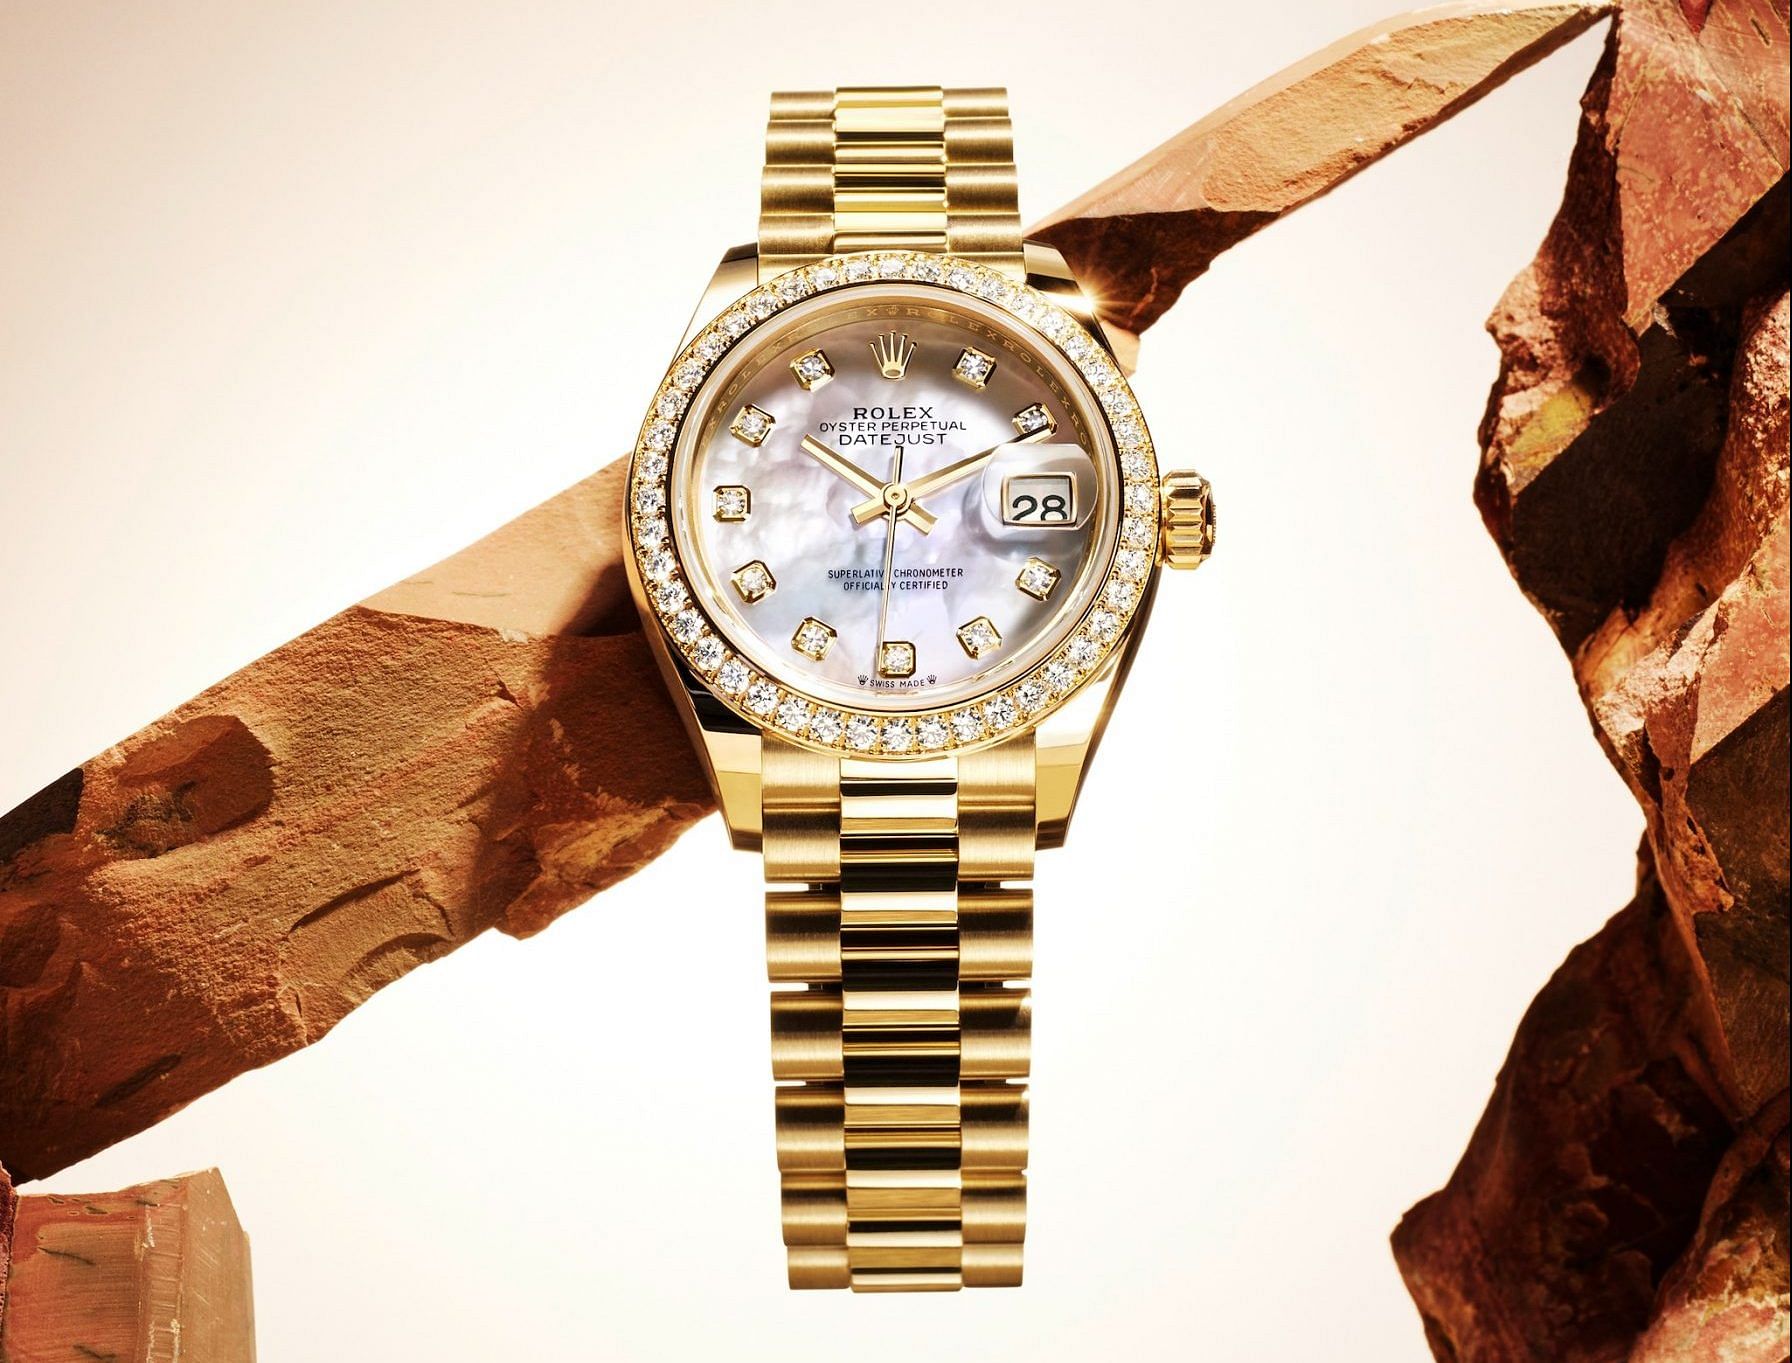 Rolex Lady-Datejust: The luxurious watch made for the independent woman with fine taste